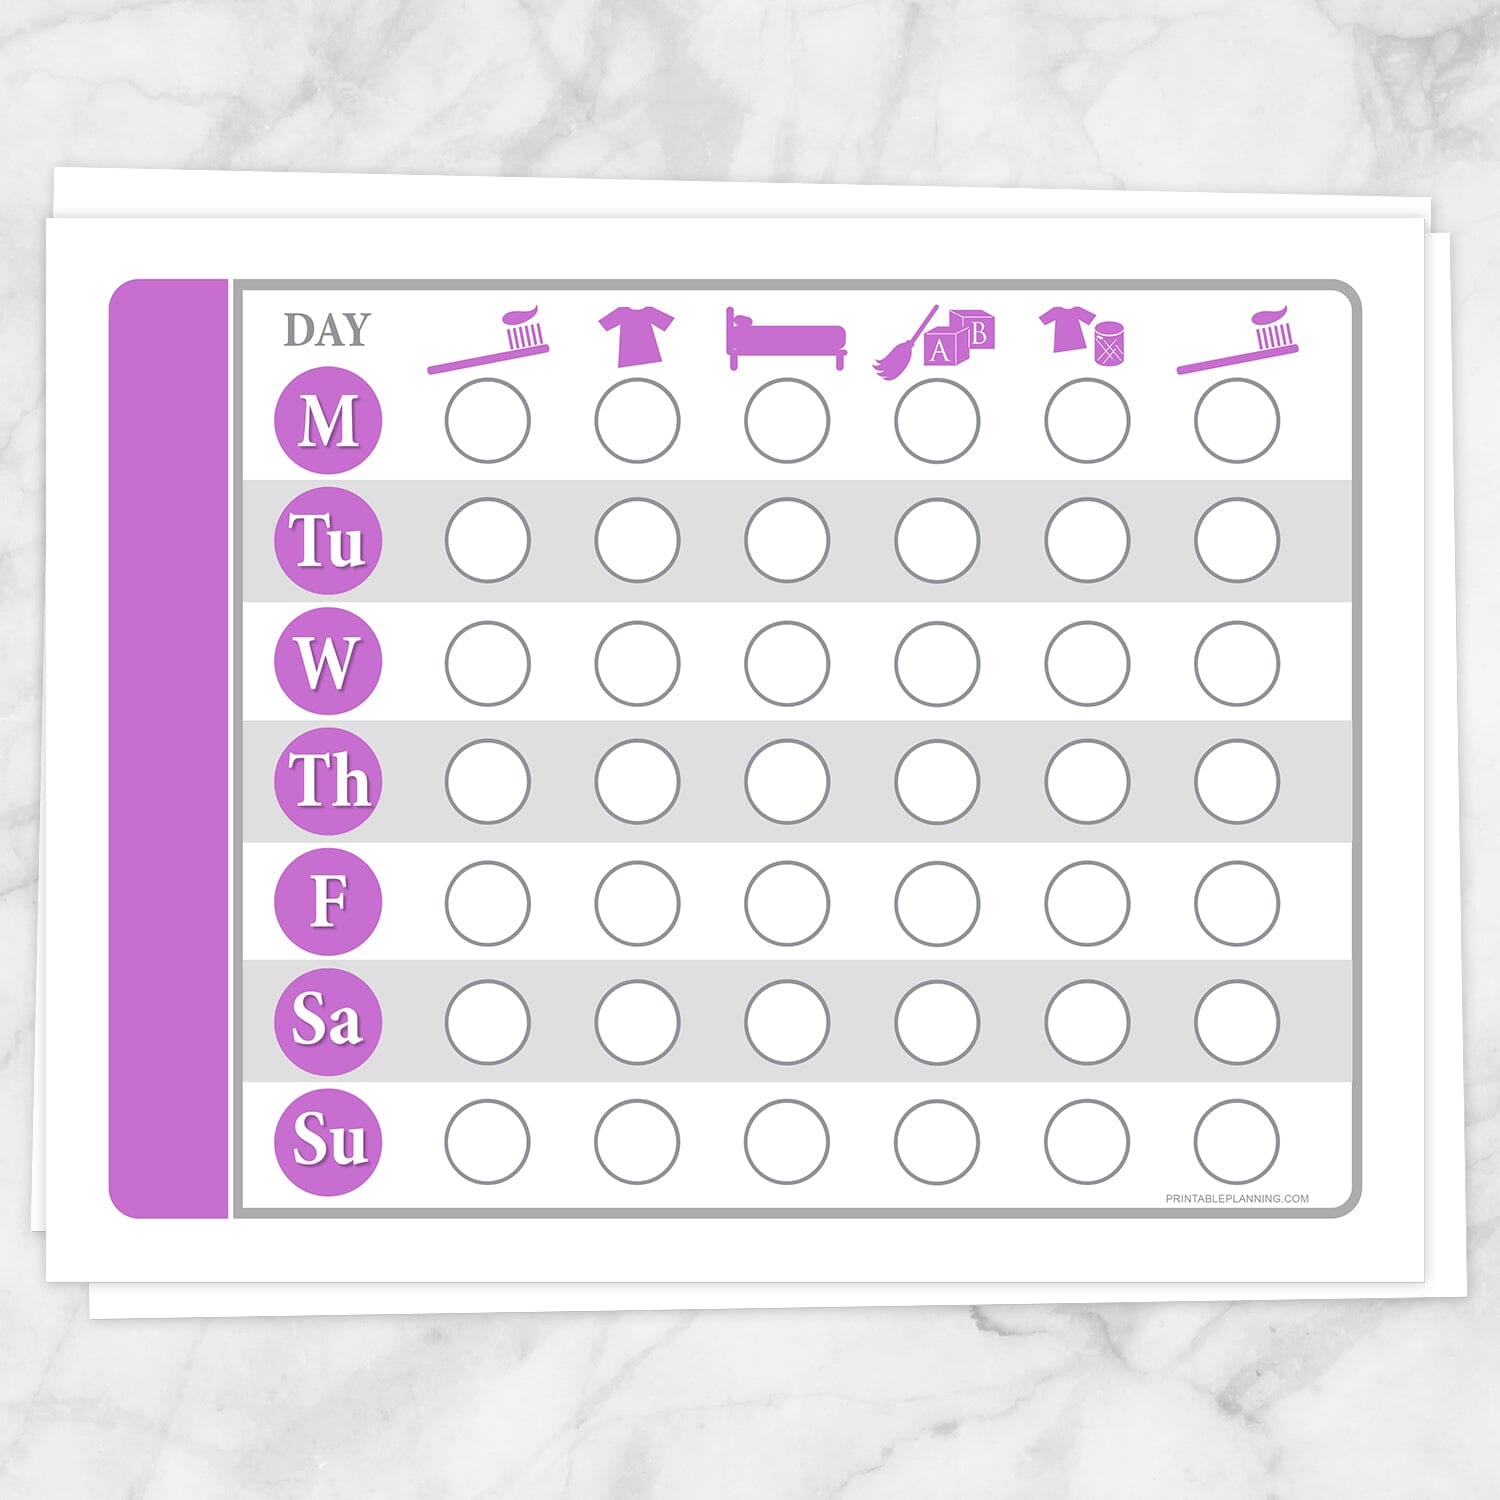 Printable Toddler Chore Chart - Purple Daily Routine Weekly Pages at Printable Planning.